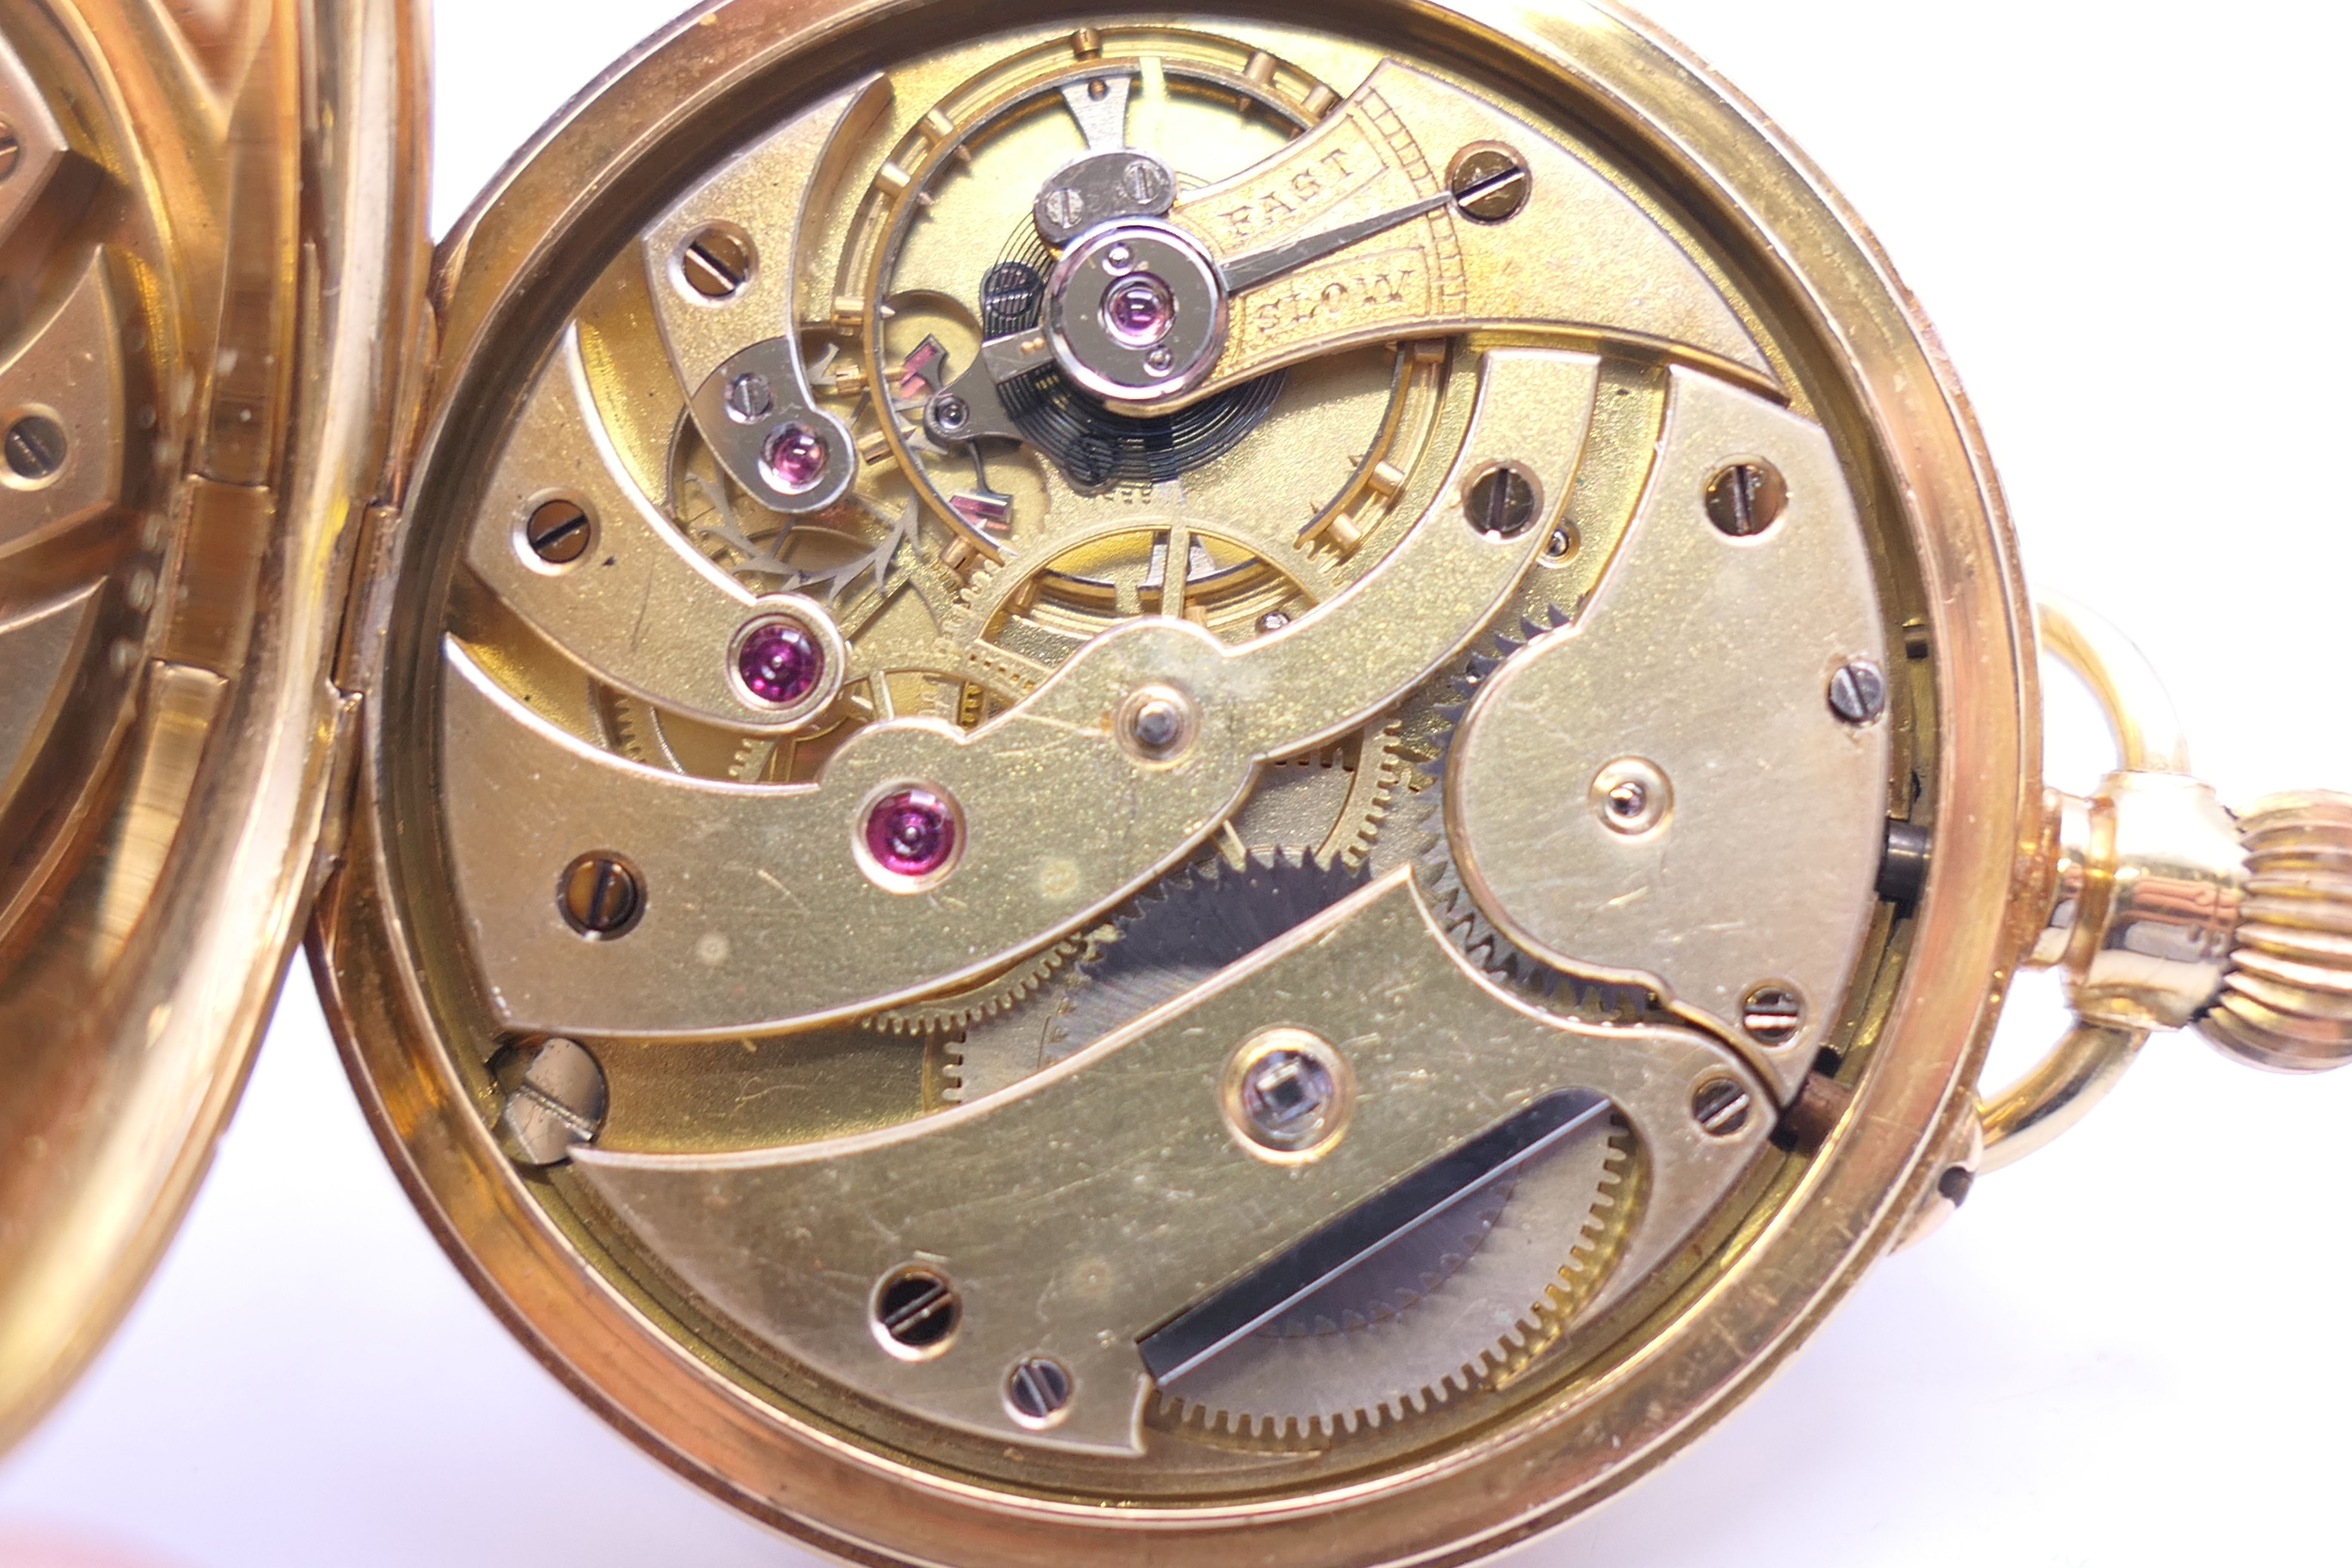 An 18 ct gold pocket watch with florally engraved dial, serial number 15514. 4.25 diameter. - Image 8 of 8